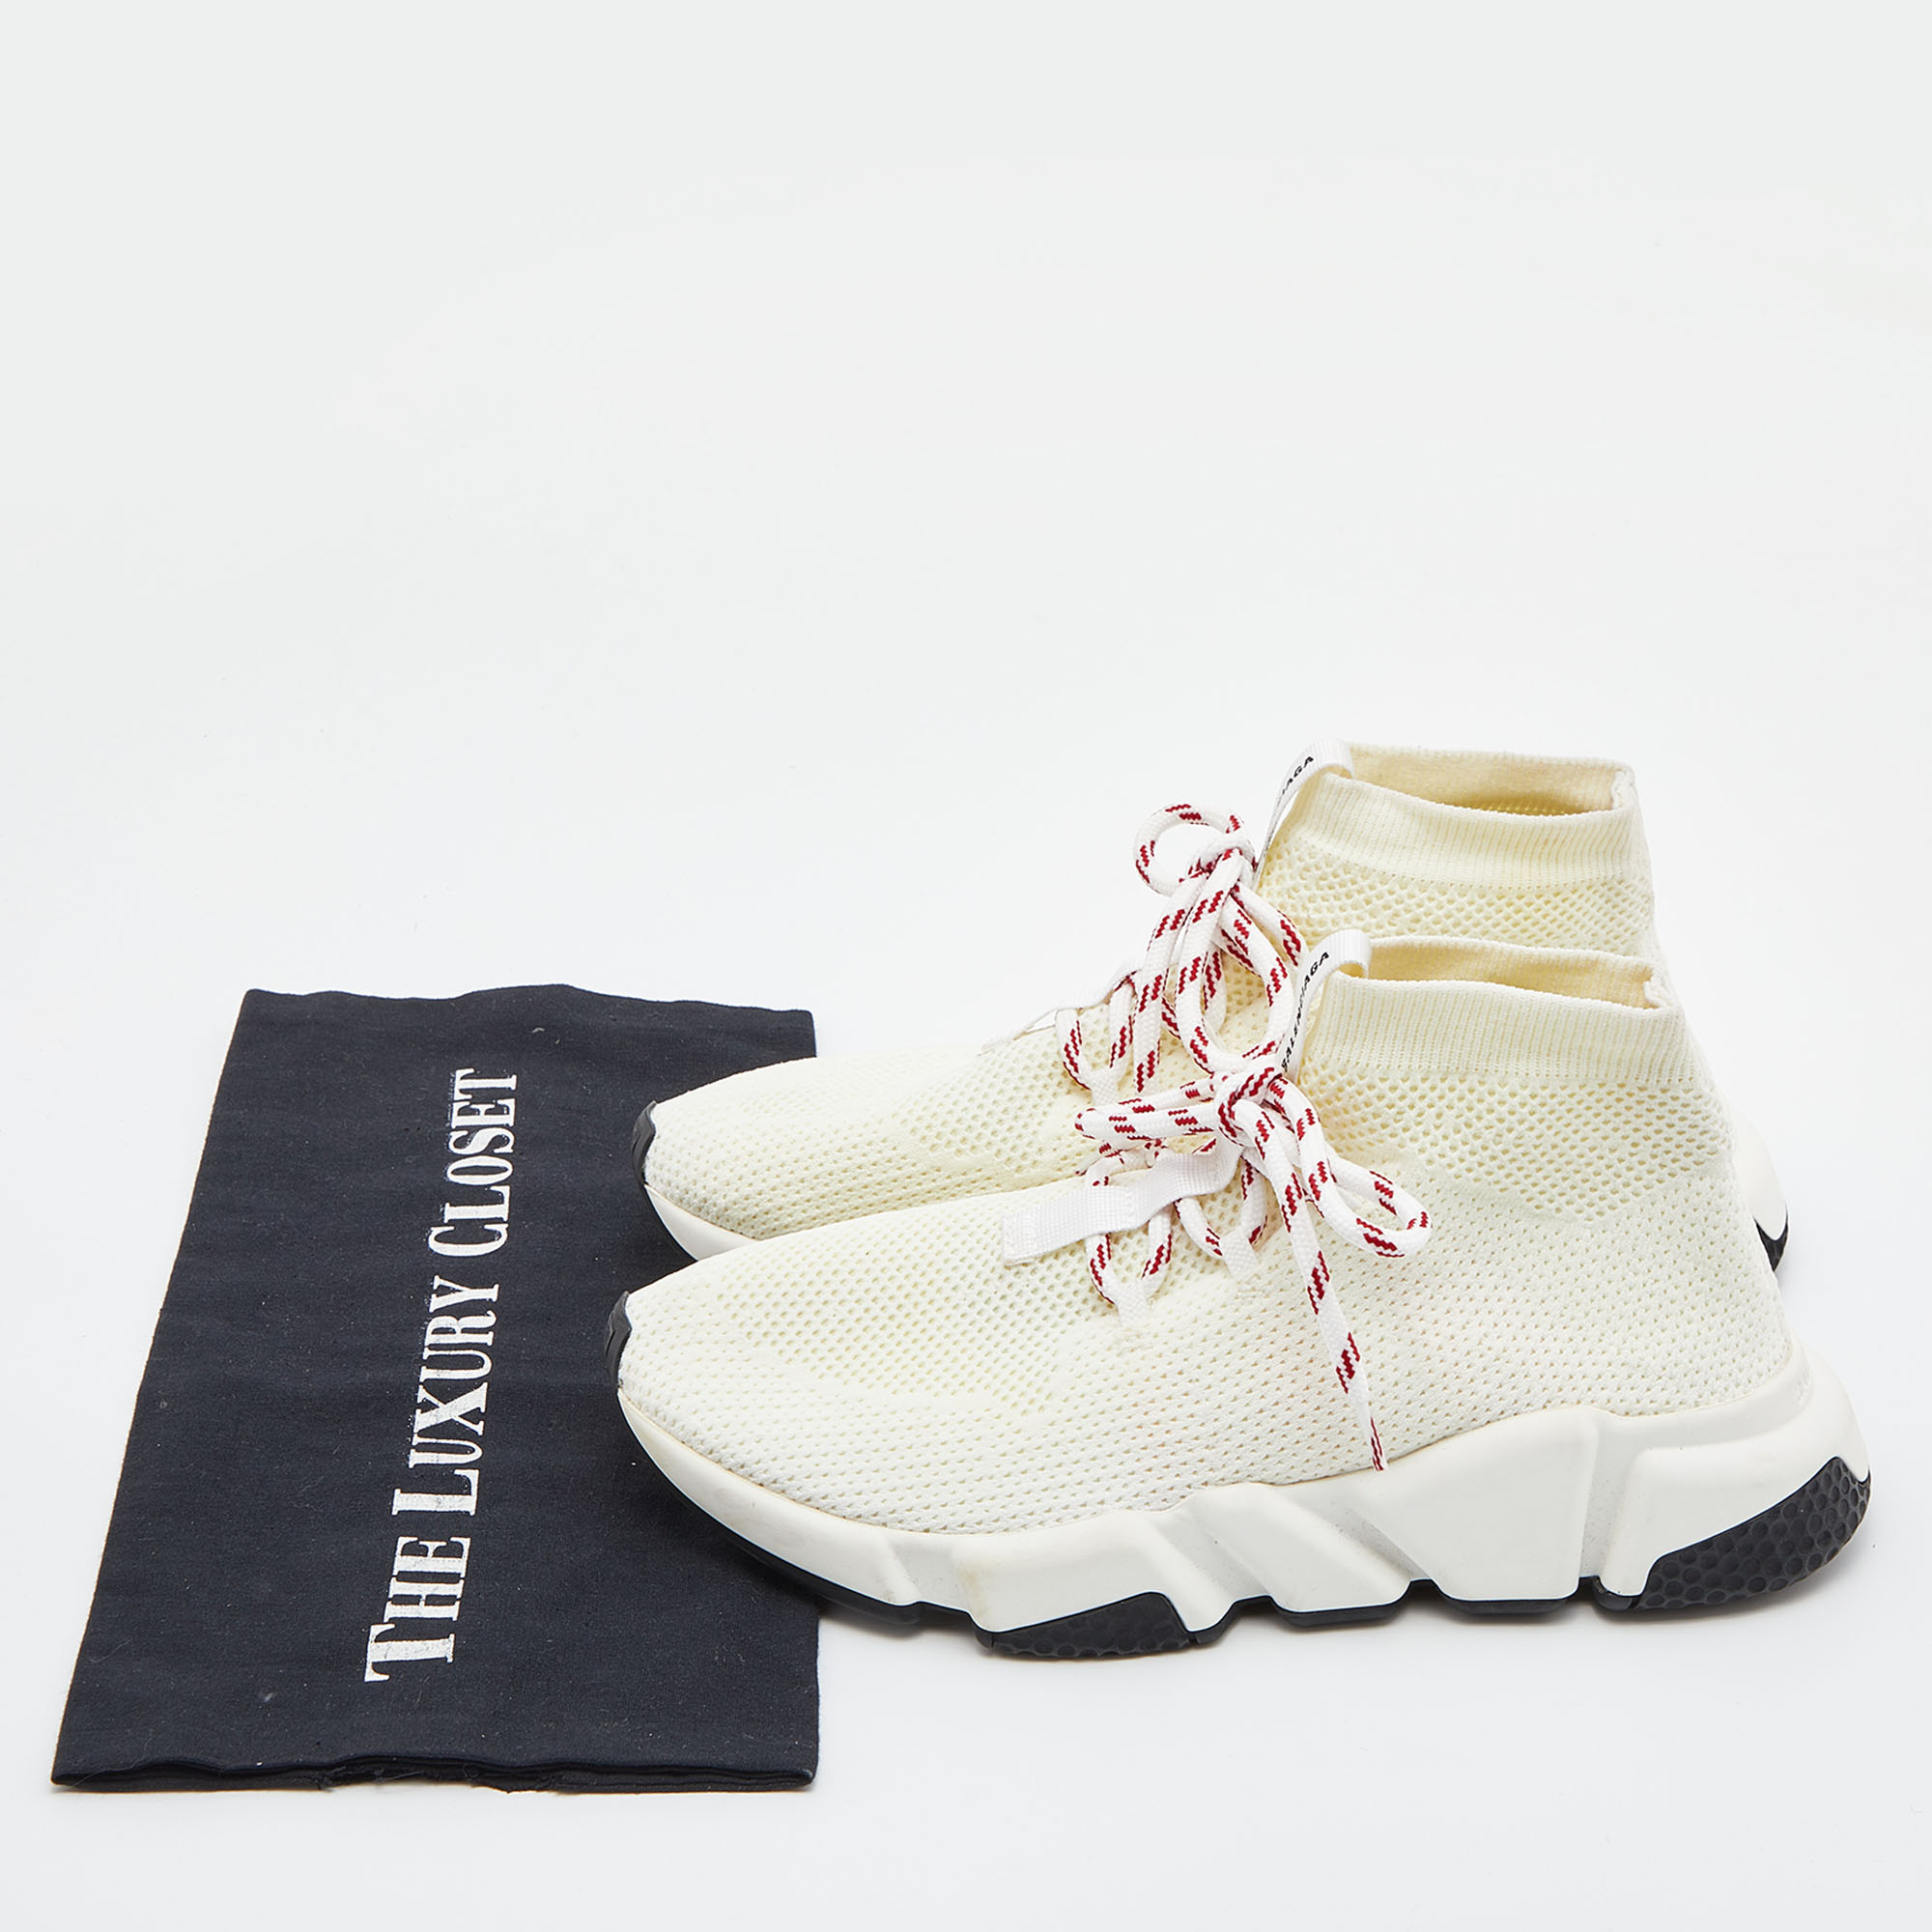 Balenciaga Off White Knit Fabric Speed Lace Up High Top Sneakers Size 38